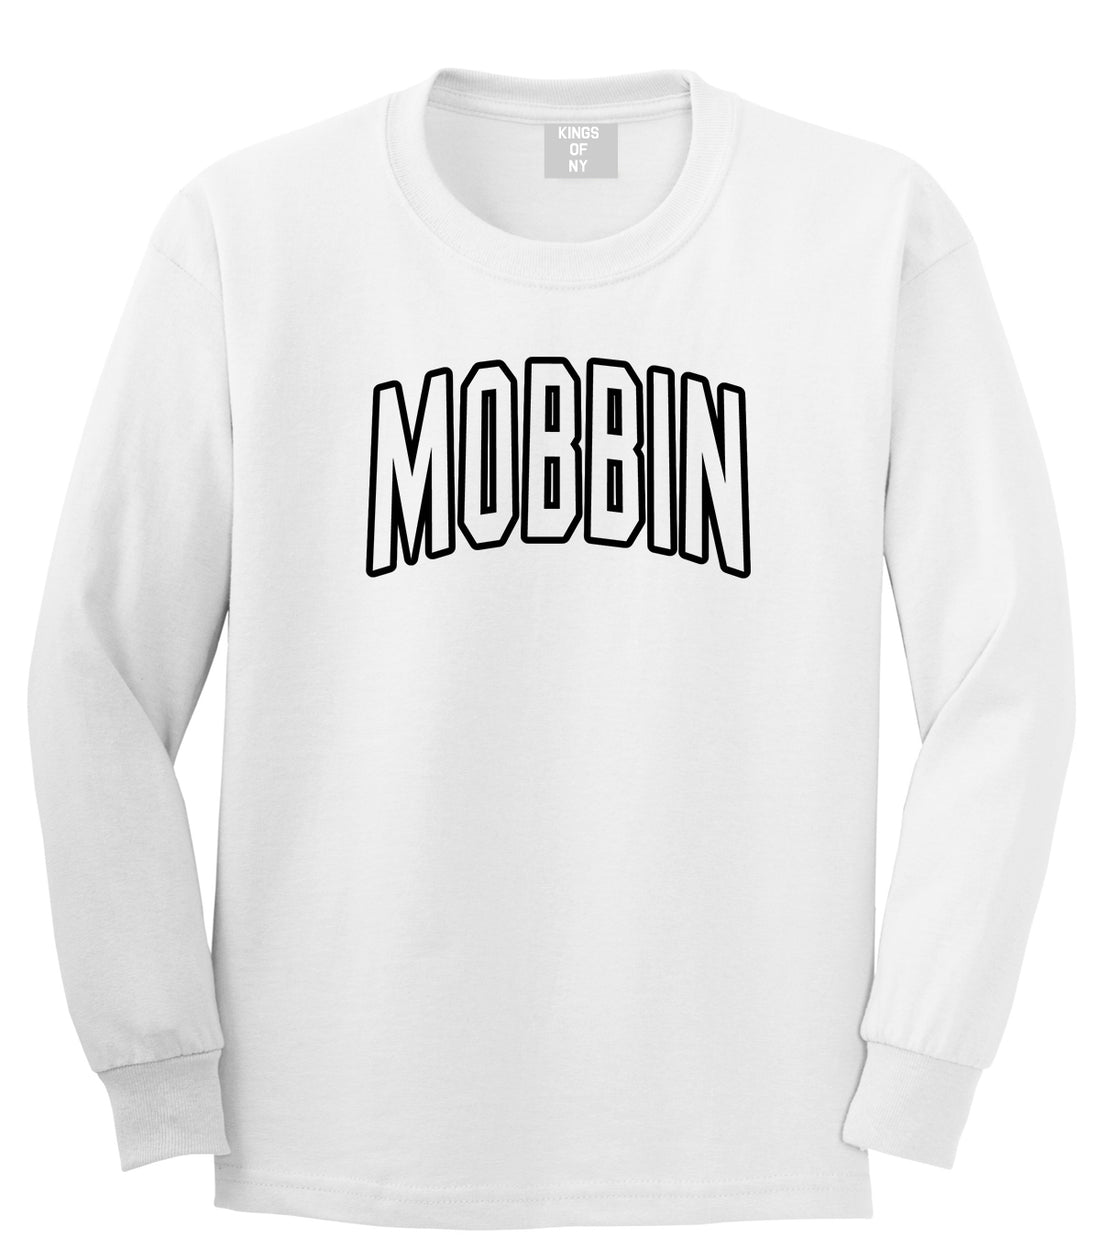 Mobbin Outline Squad Mens Long Sleeve T-Shirt White by Kings Of NY